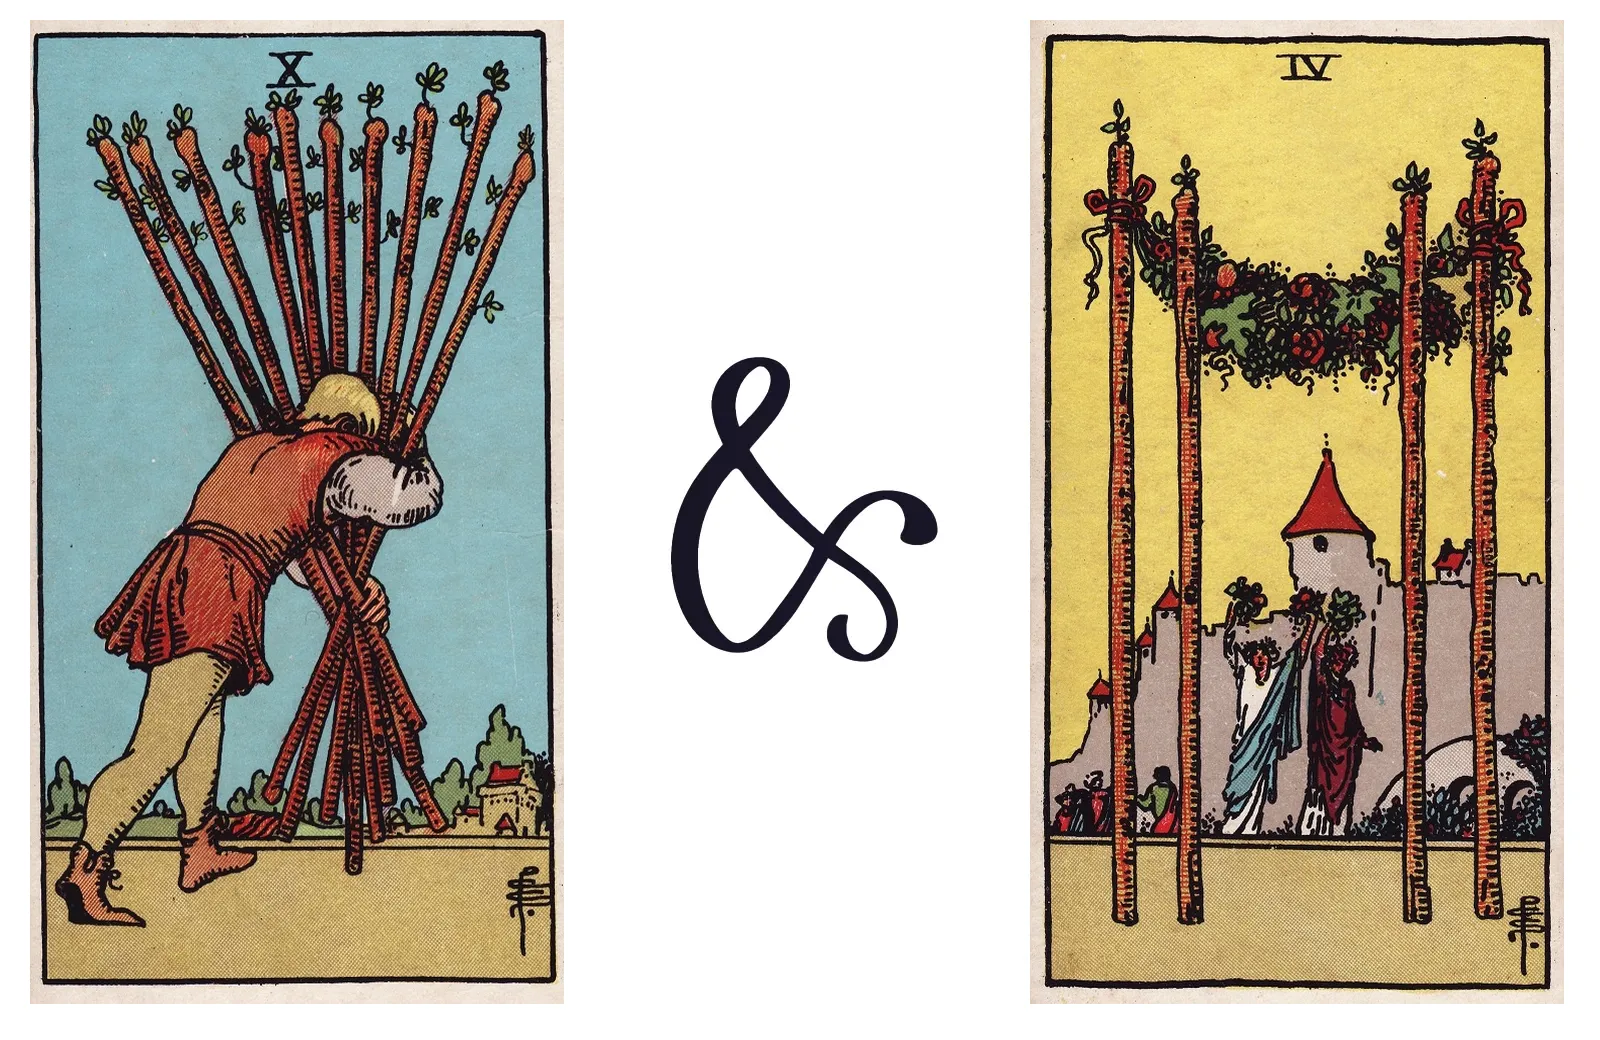 Ten of Wands and Four of Wands